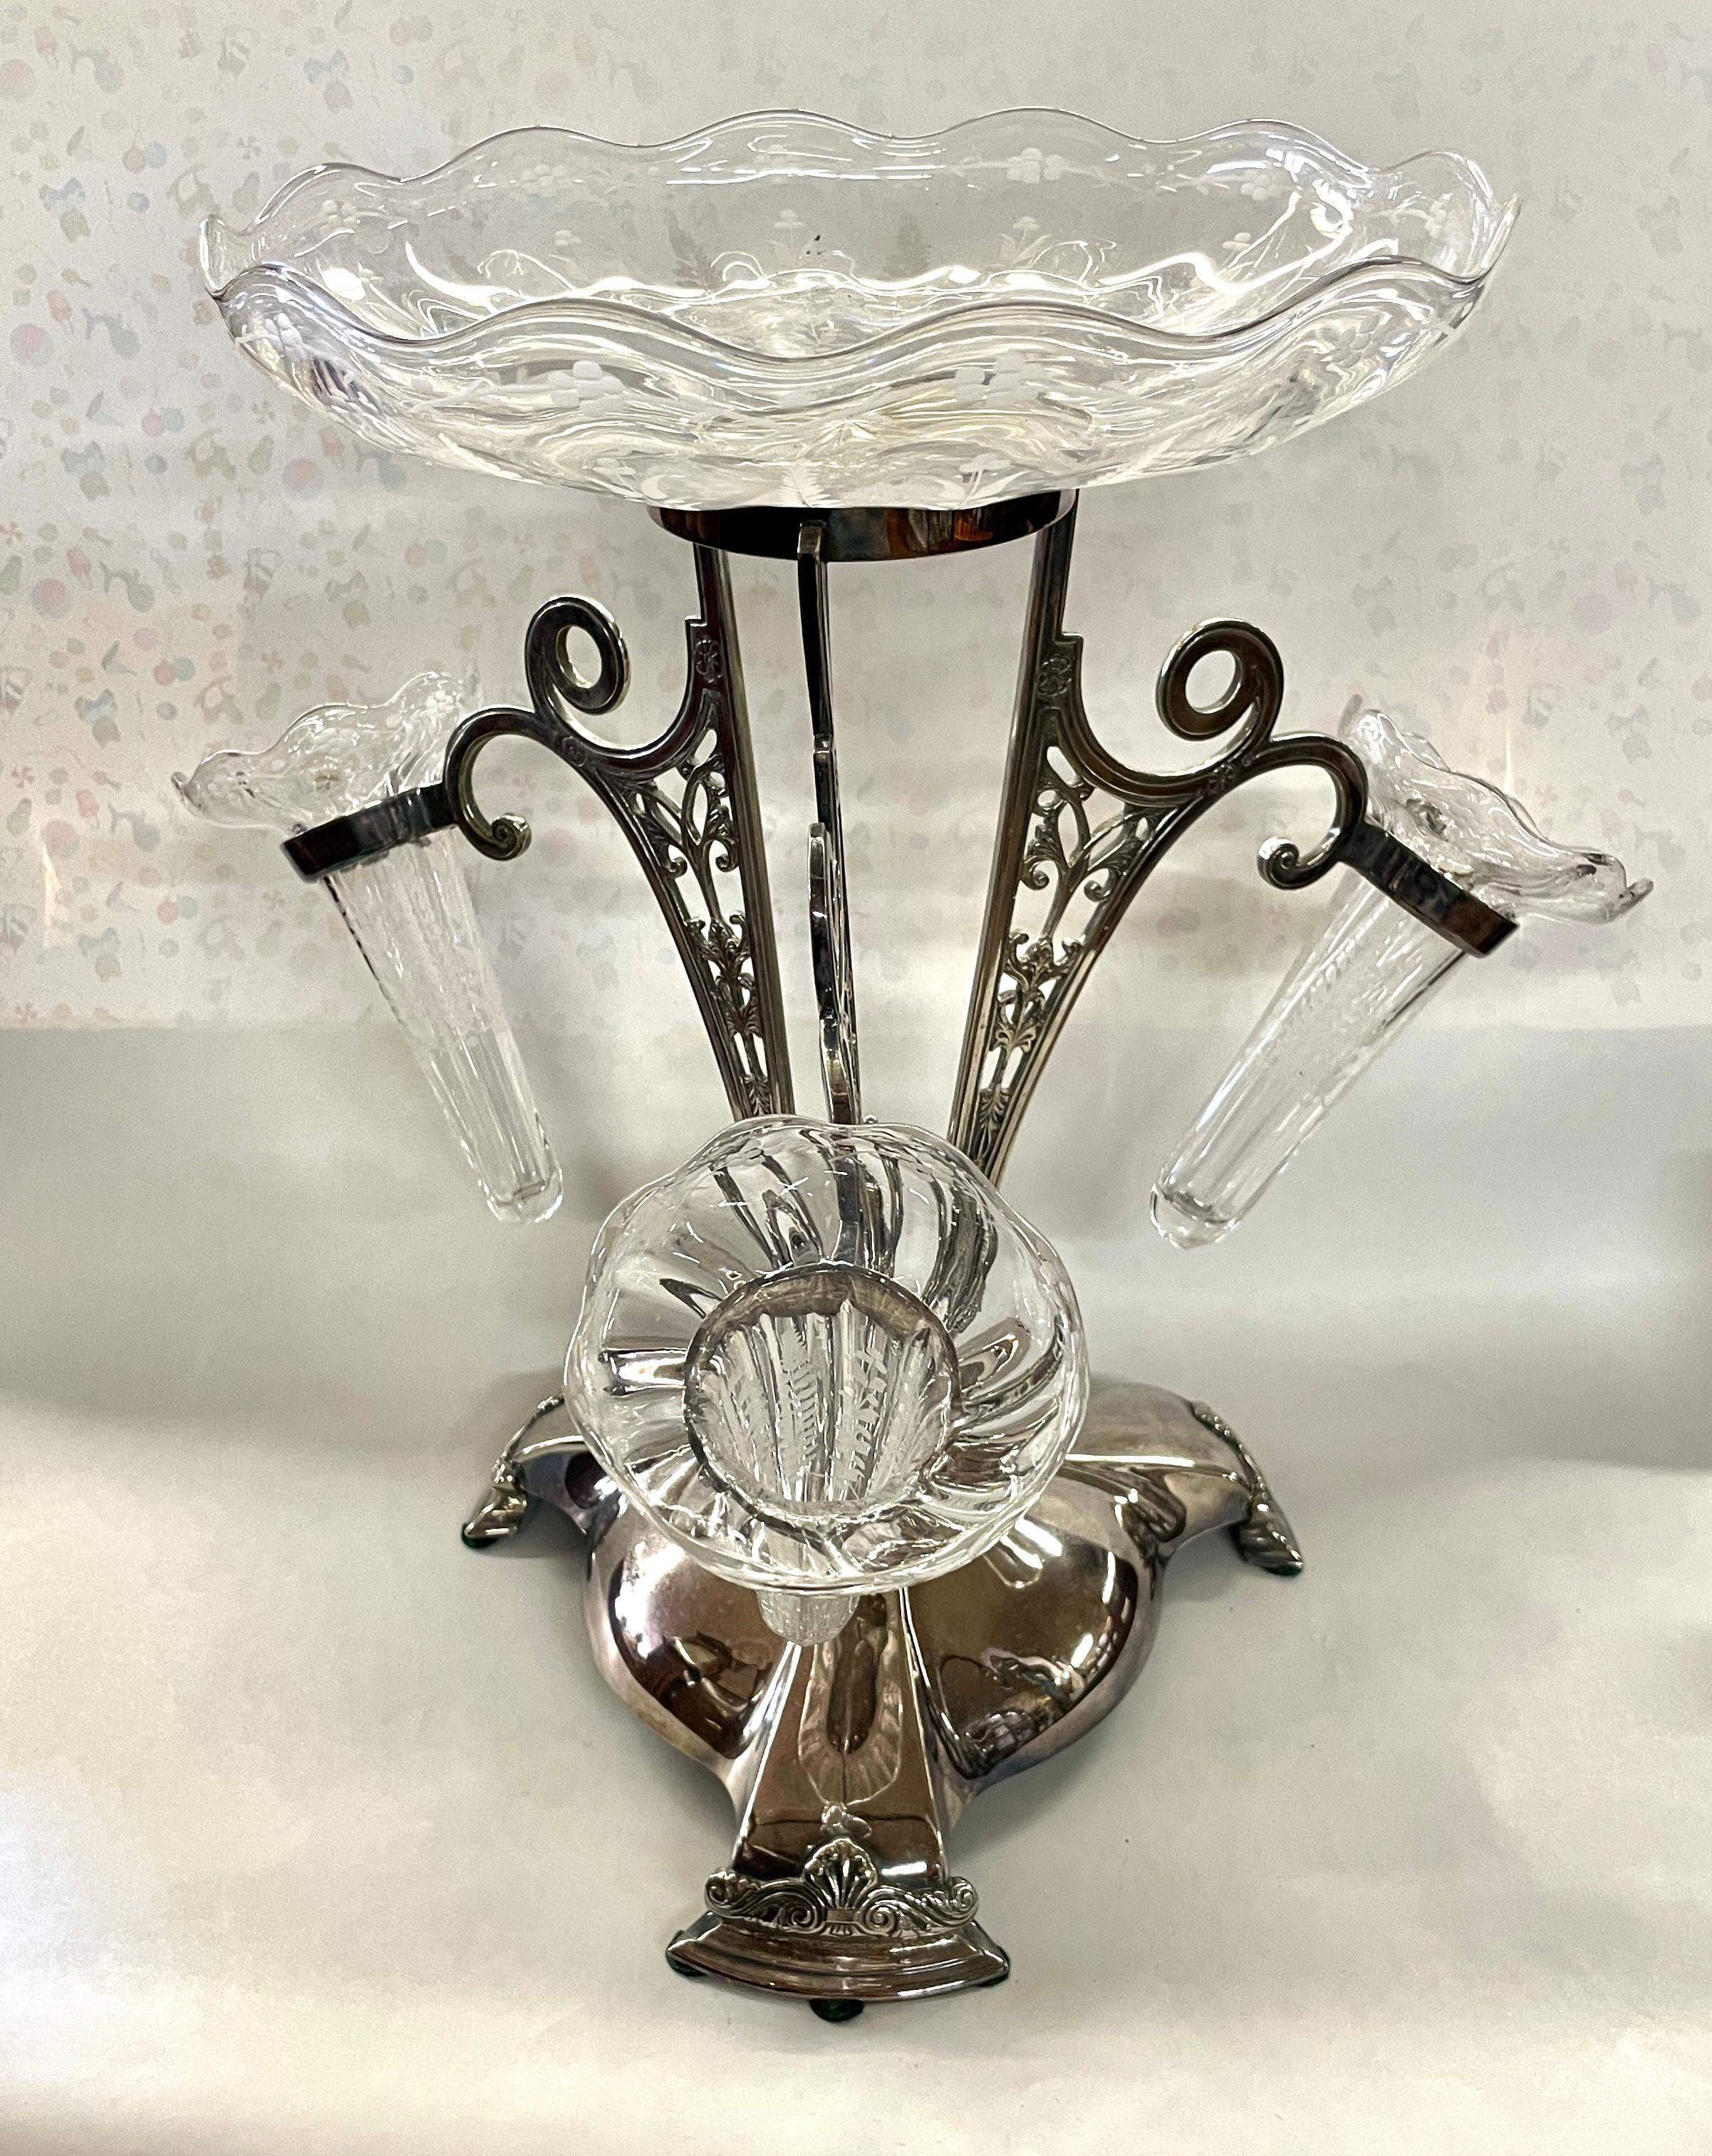 An Extraordinary Large Size Antique English Sheffield Silver Plate and Hand Engraved Crystal Epergne Centerpiece with maker's marks under the base for the highly collected Royal Warranted silversmiths, Walker & Hall (Sheffield and London).  The